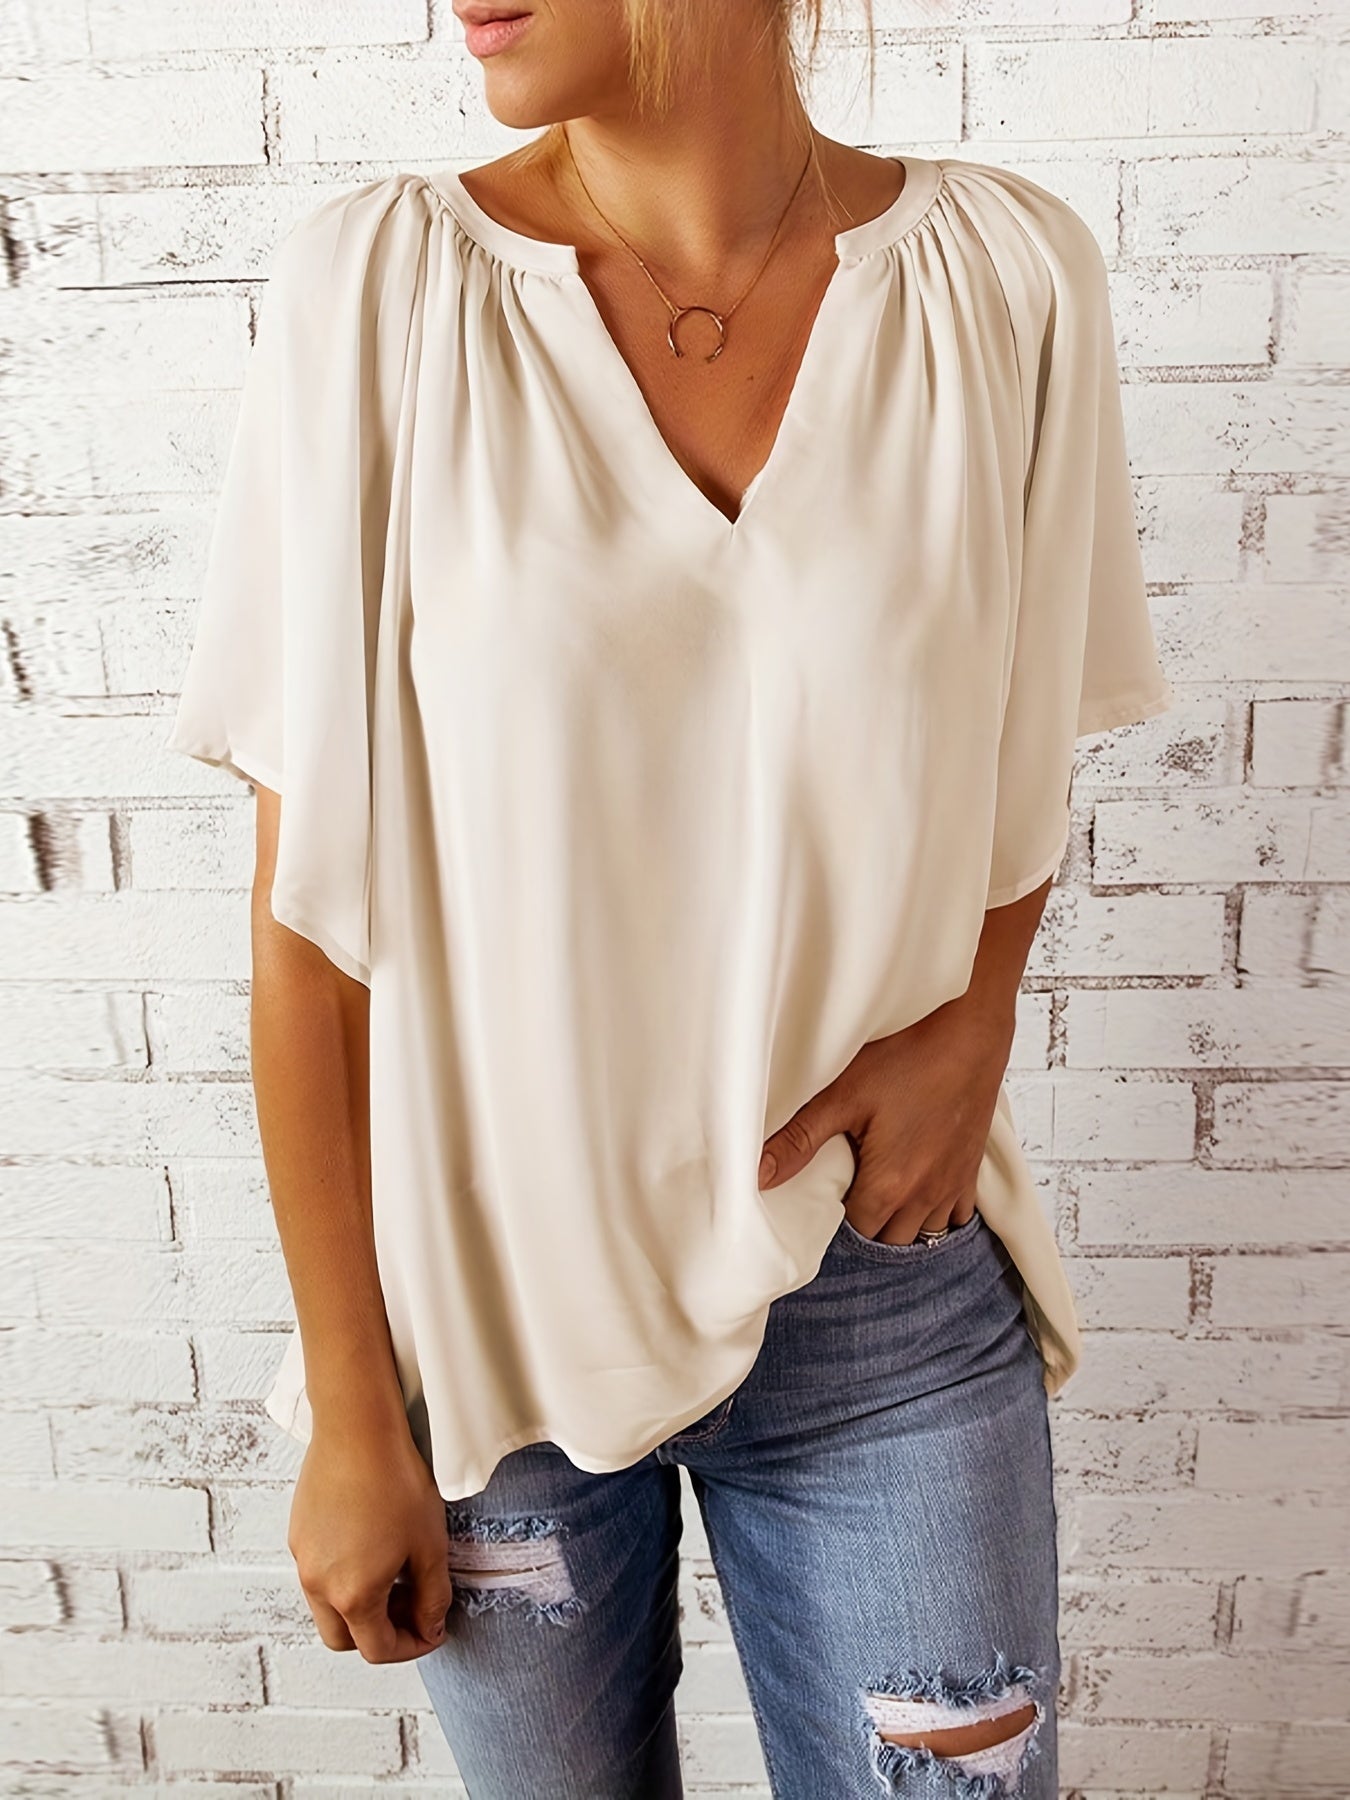 「lovevop」Notched Neck Loose Blouse, Casual Top For Summer & Spring, Women's Clothing